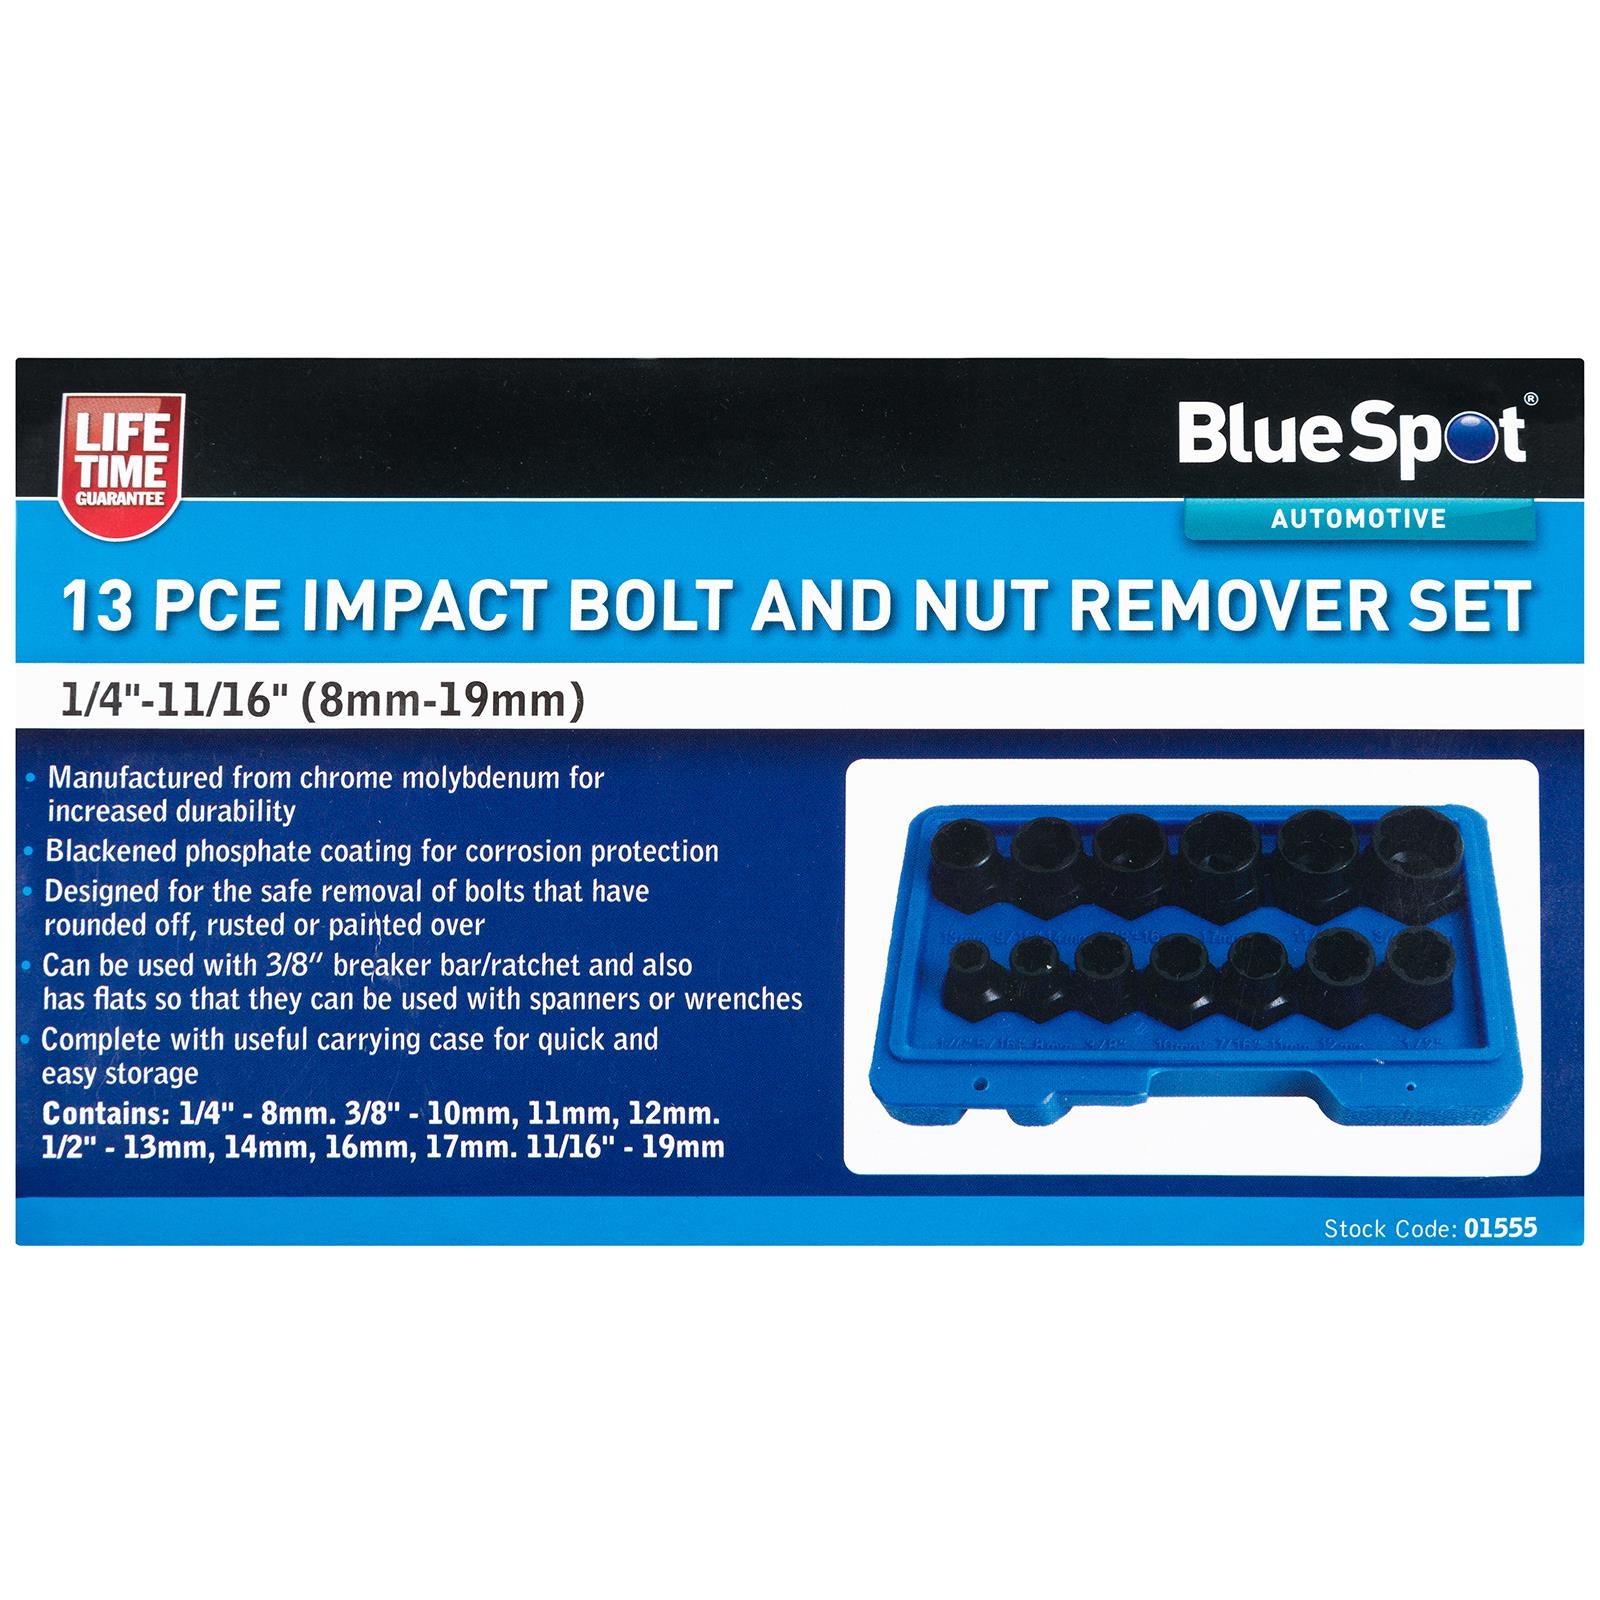 BlueSpot Impact Bolt and Nut Remover Set 13 Piece 8-19mm 1/4"-11/16